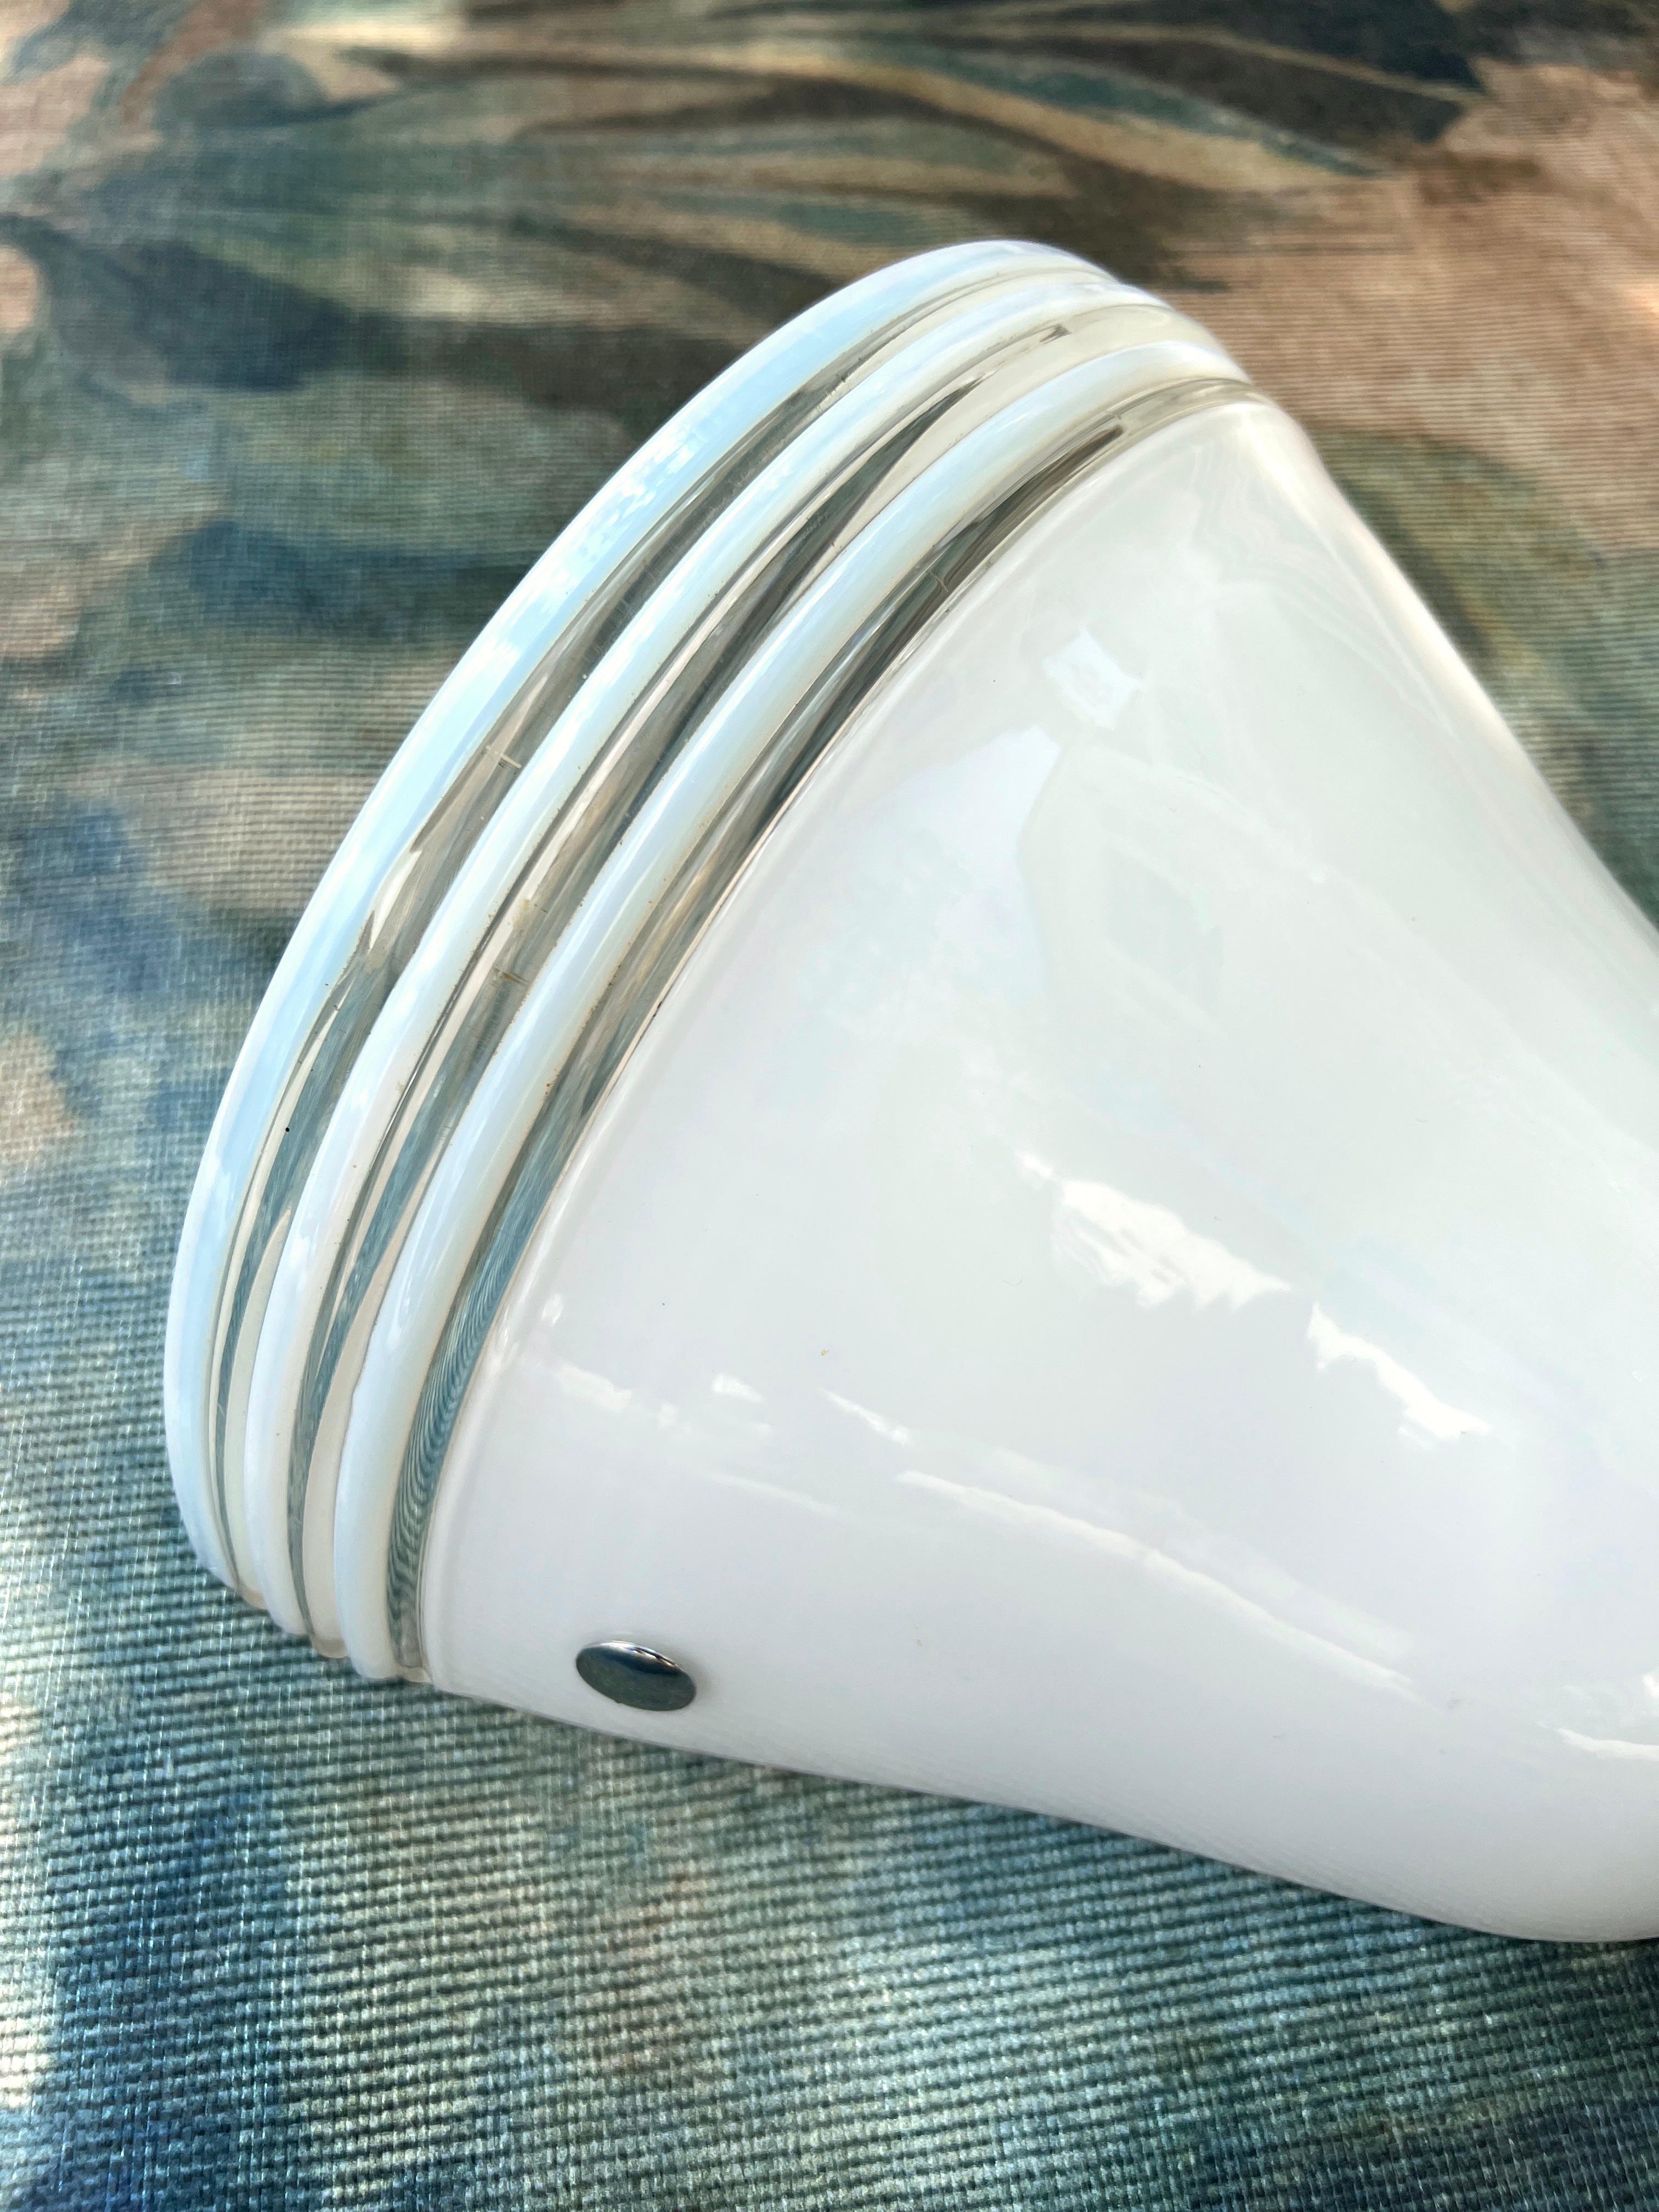 Mid-Century Modern Murano Glass Sconce in White, by Leucos, c. 1970s In Good Condition For Sale In Fort Lauderdale, FL